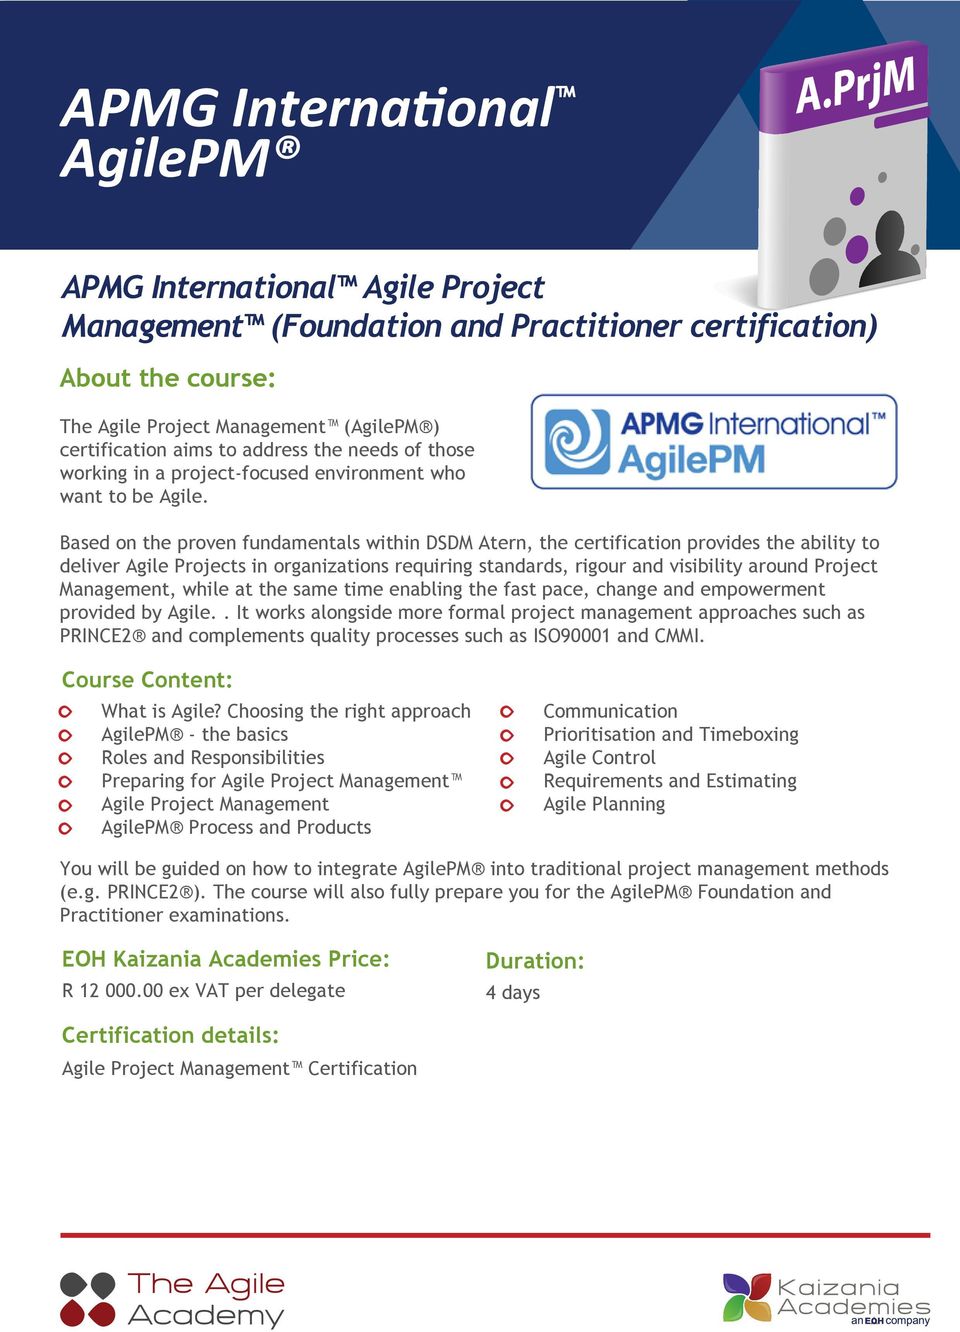 Based on the proven fundamentals within DSDM Atern, the certification provides the ability to deliver Agile Projects in organizations requiring standards, rigour and visibility around Project